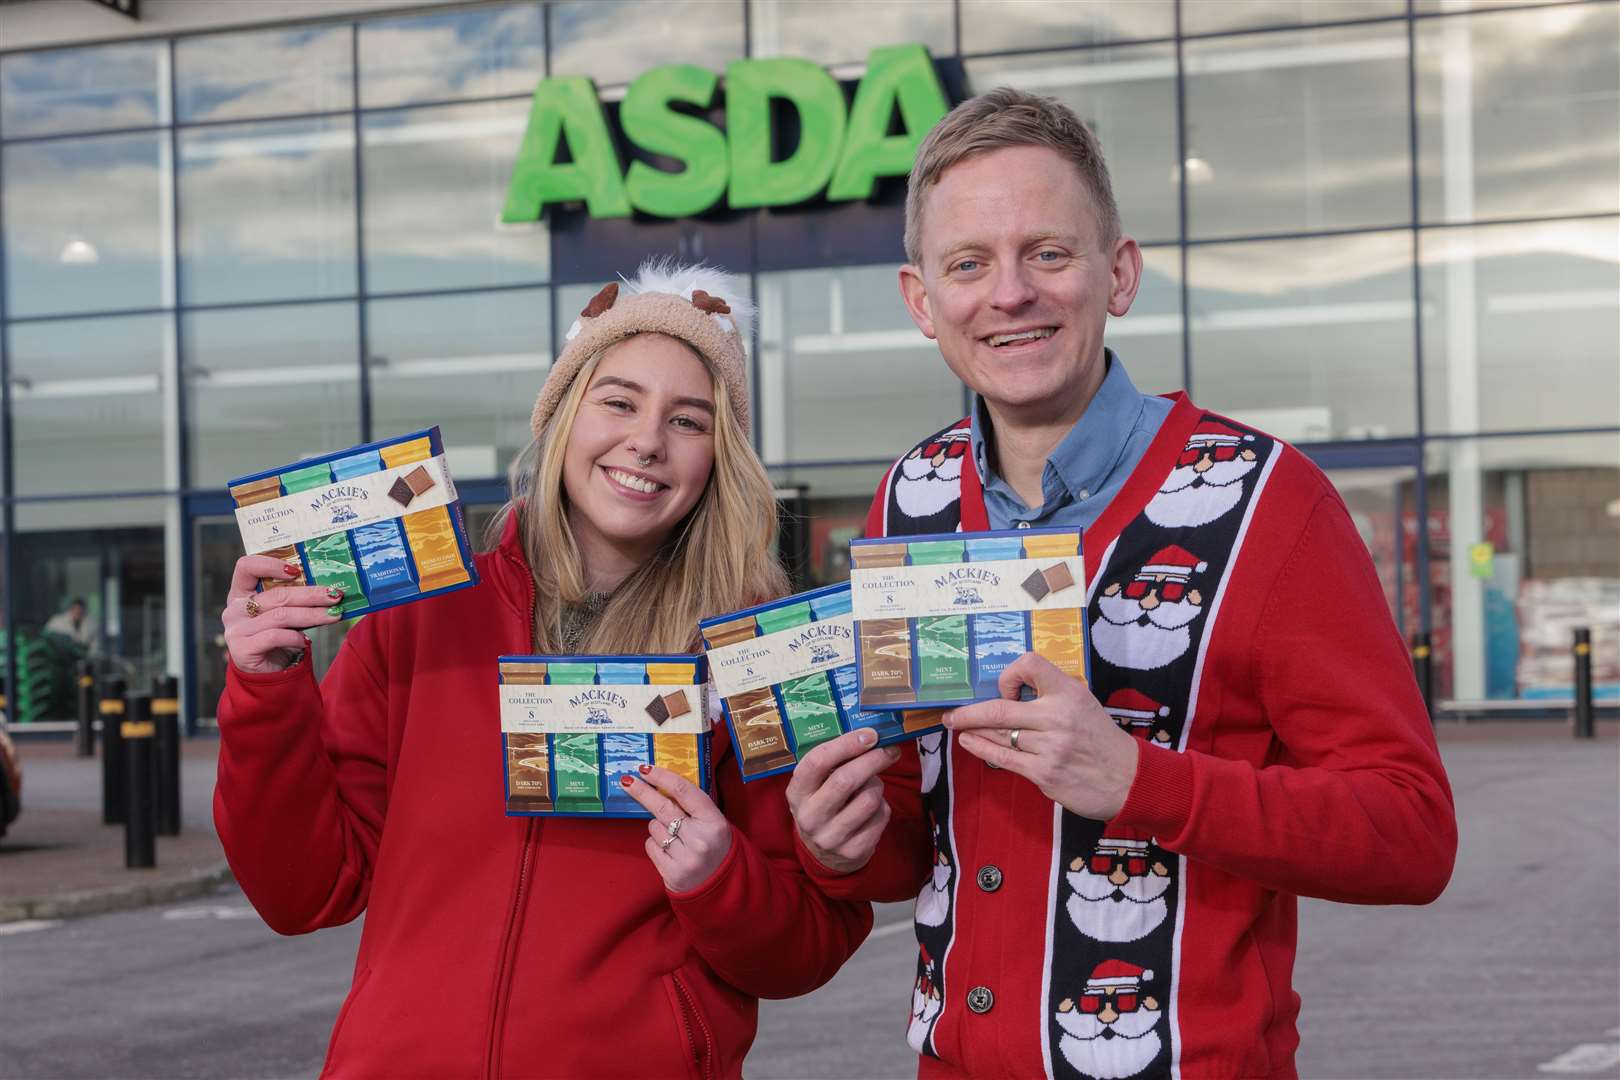 Neda Plachkova from Asda with Stuart Common, Sales and Marketing Director of Mackie’s of Scotland and the new packaging.